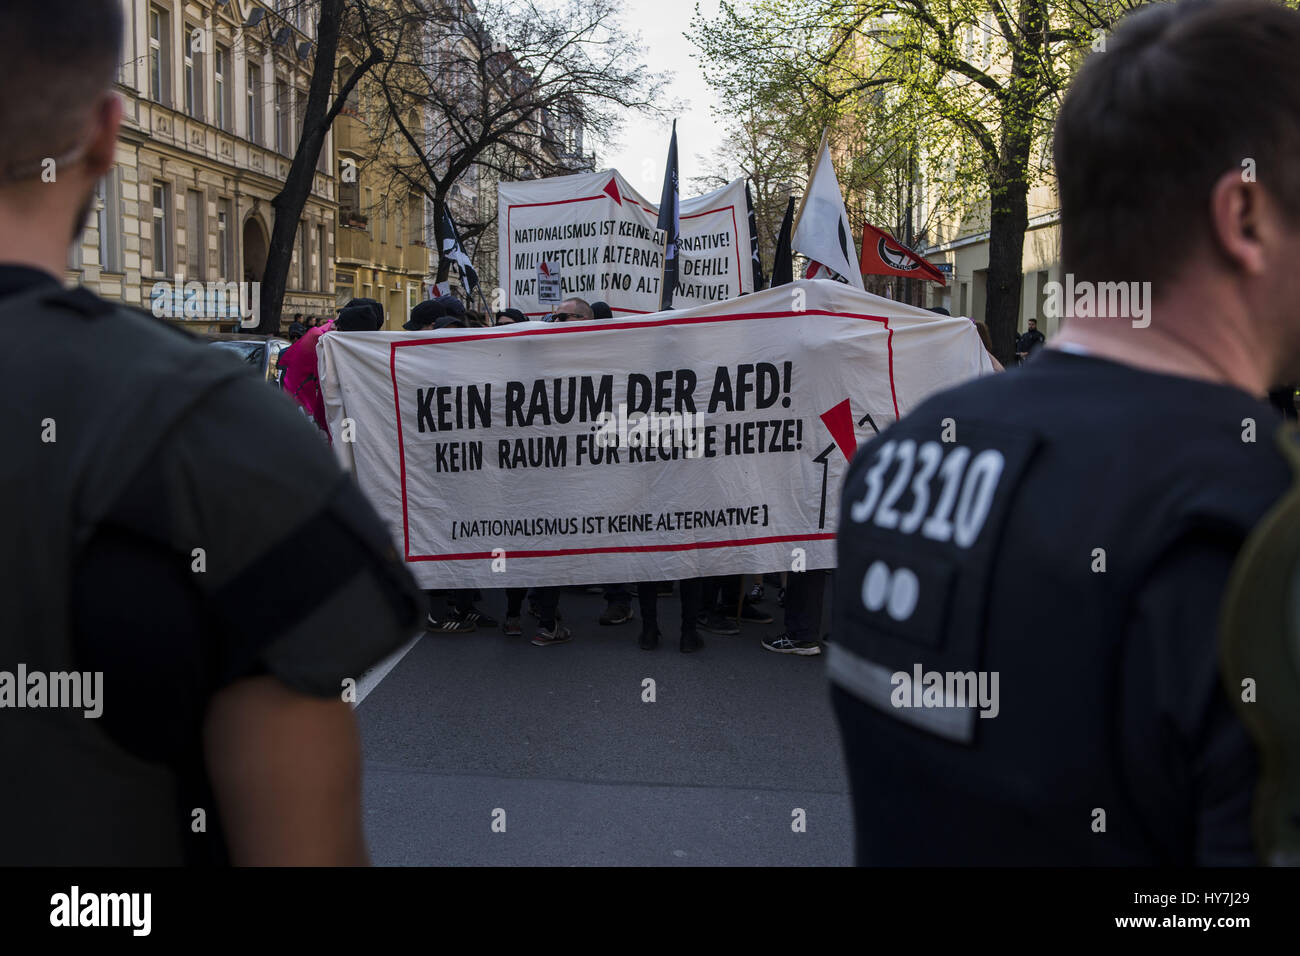 Berlin, Berlin, Germany. 1st Apr, 2017. Several hundred anti-fascists rally under the slogan 'Kein Raum der AfD! Kein Raum fÃ¼r rechte Hetze!' against the Alternative for Germany (German: Alternative fÃ¼r Deutschland, AfD) is a right-wing populist and Eurosceptic] political party in Germany in Berlin Weissensee. Credit: Jan Scheunert/ZUMA Wire/Alamy Live News Stock Photo